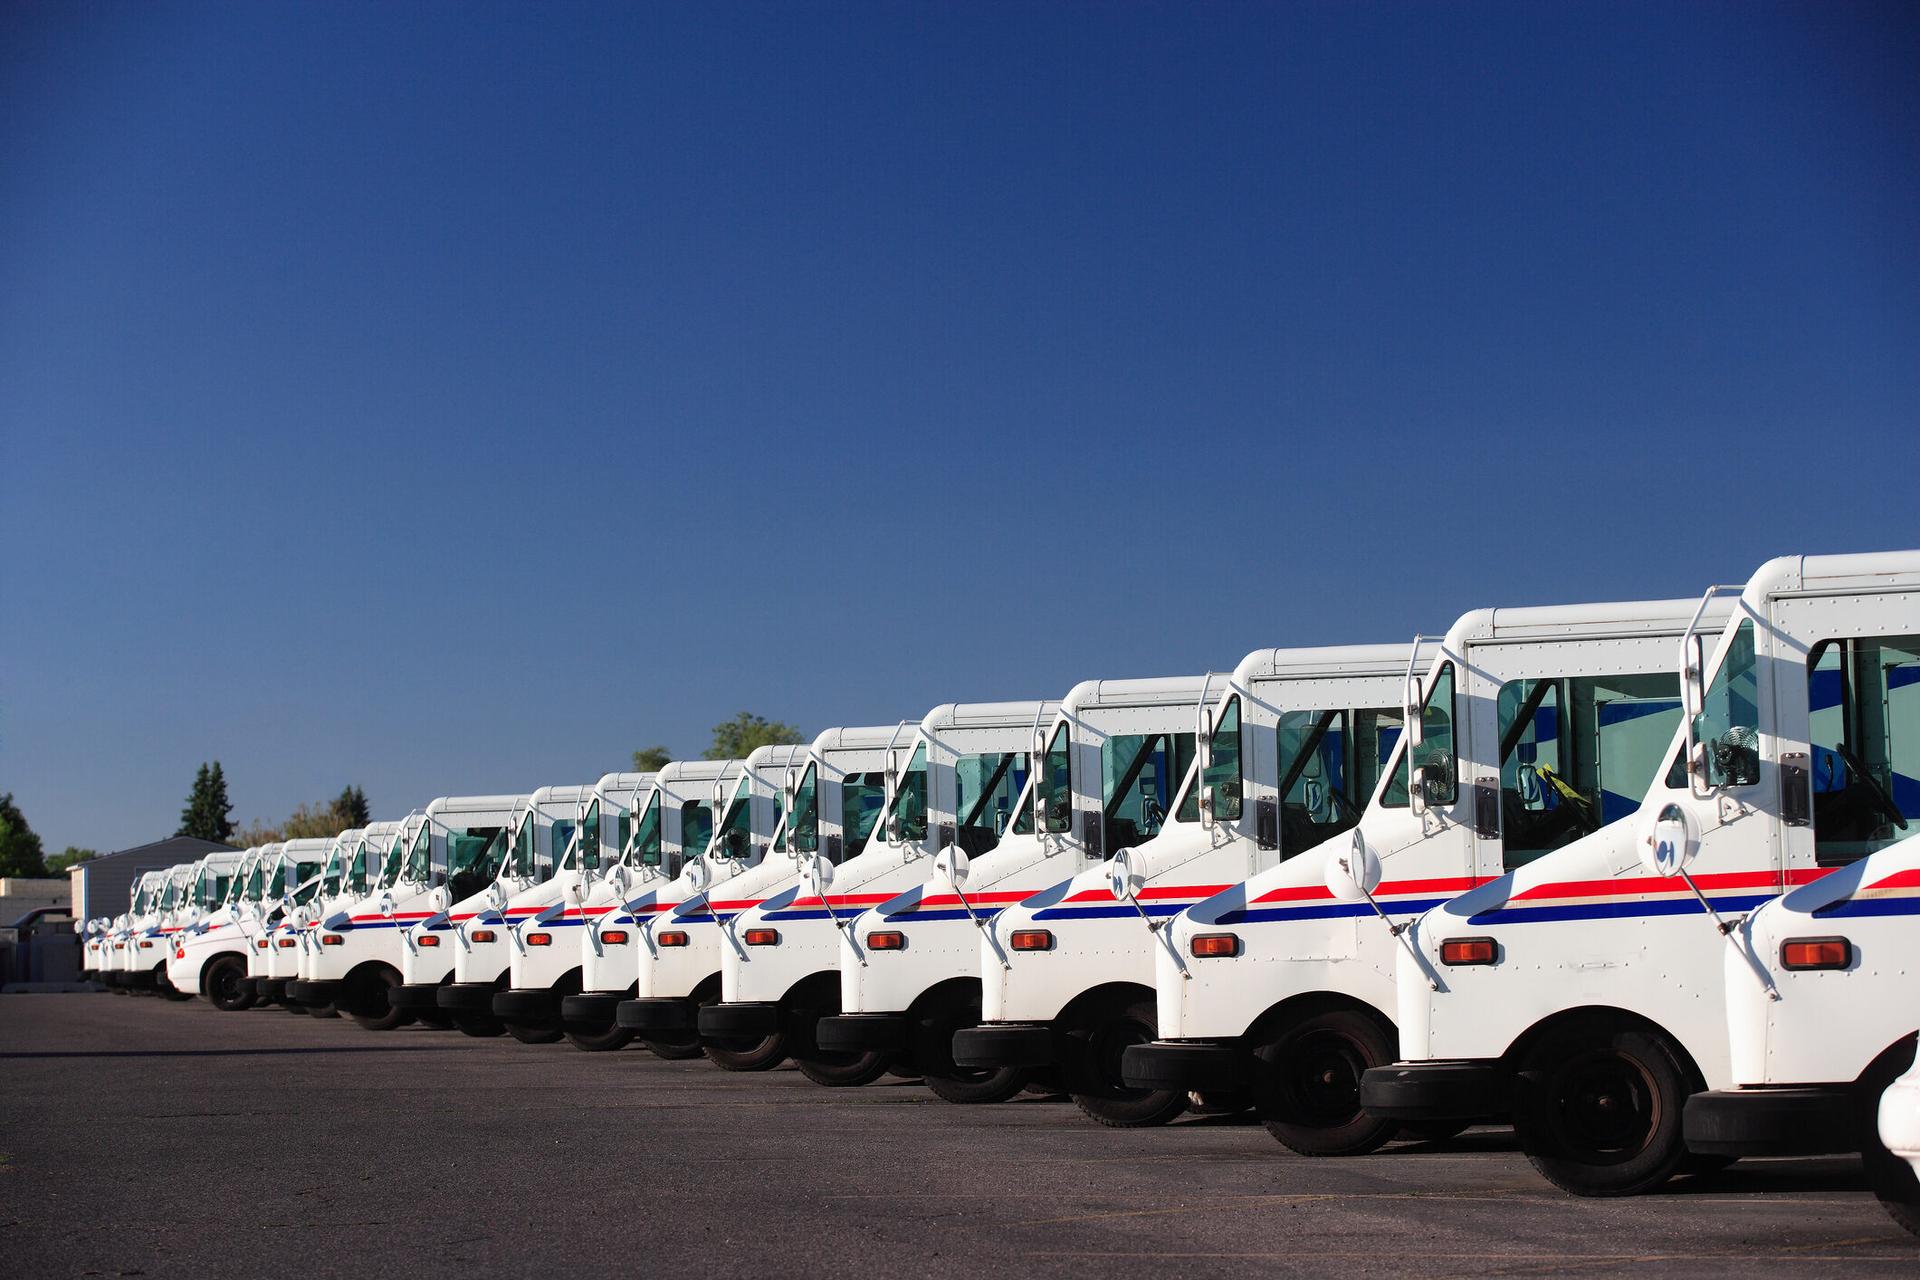 A fleet of U.S. Postal Service vehicles parked in a line. The U.S. Postal Service is expanding the use of an emergency records systems to cover ransomware attacks and other cybersecurity incidents. (Photo credit:
BrianBrownImages via Getty)